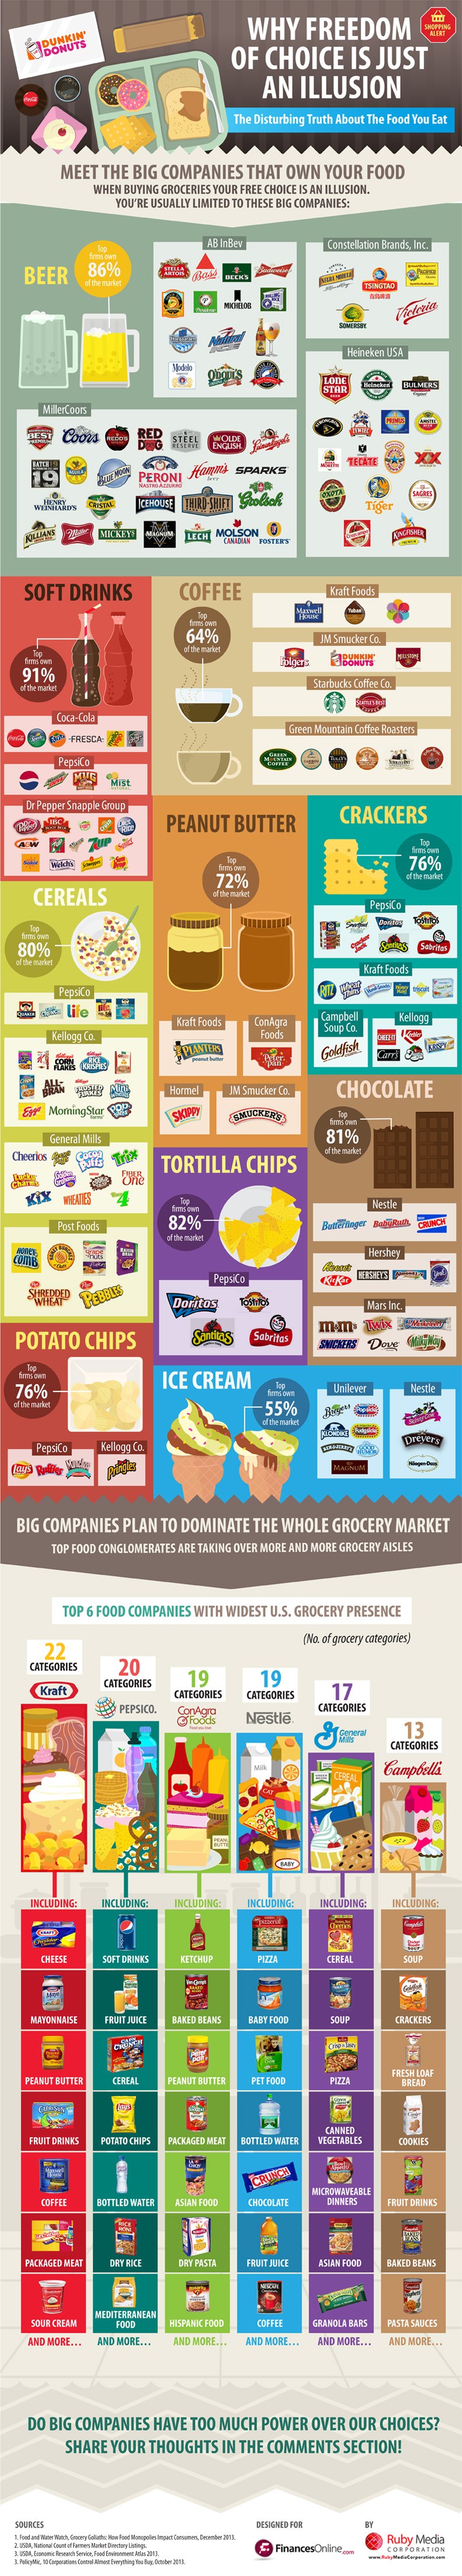 Food Conglomerates_Infographic_Final 2